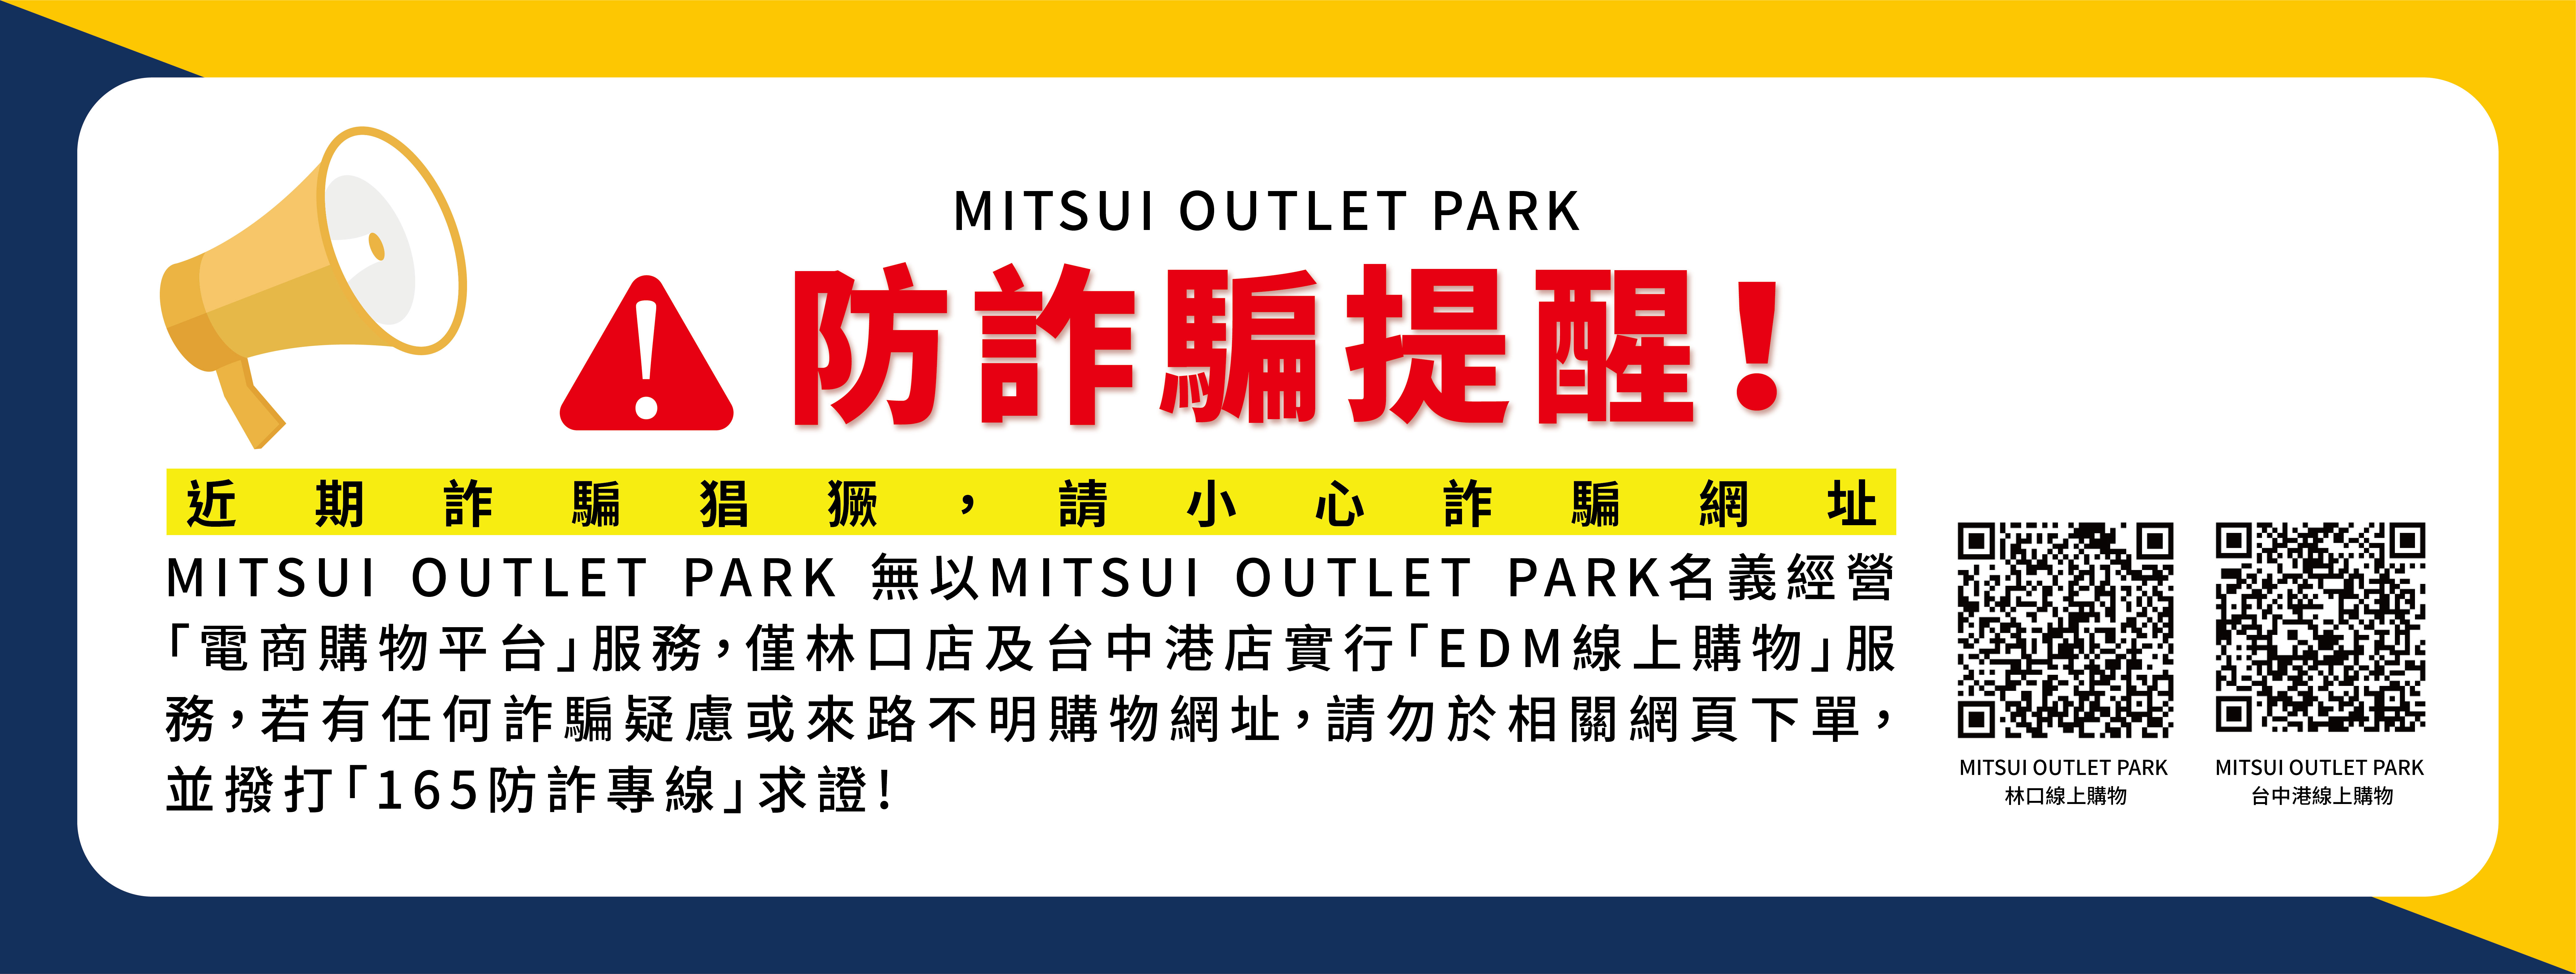 MITSUI OUTLET PARK 防詐騙提醒